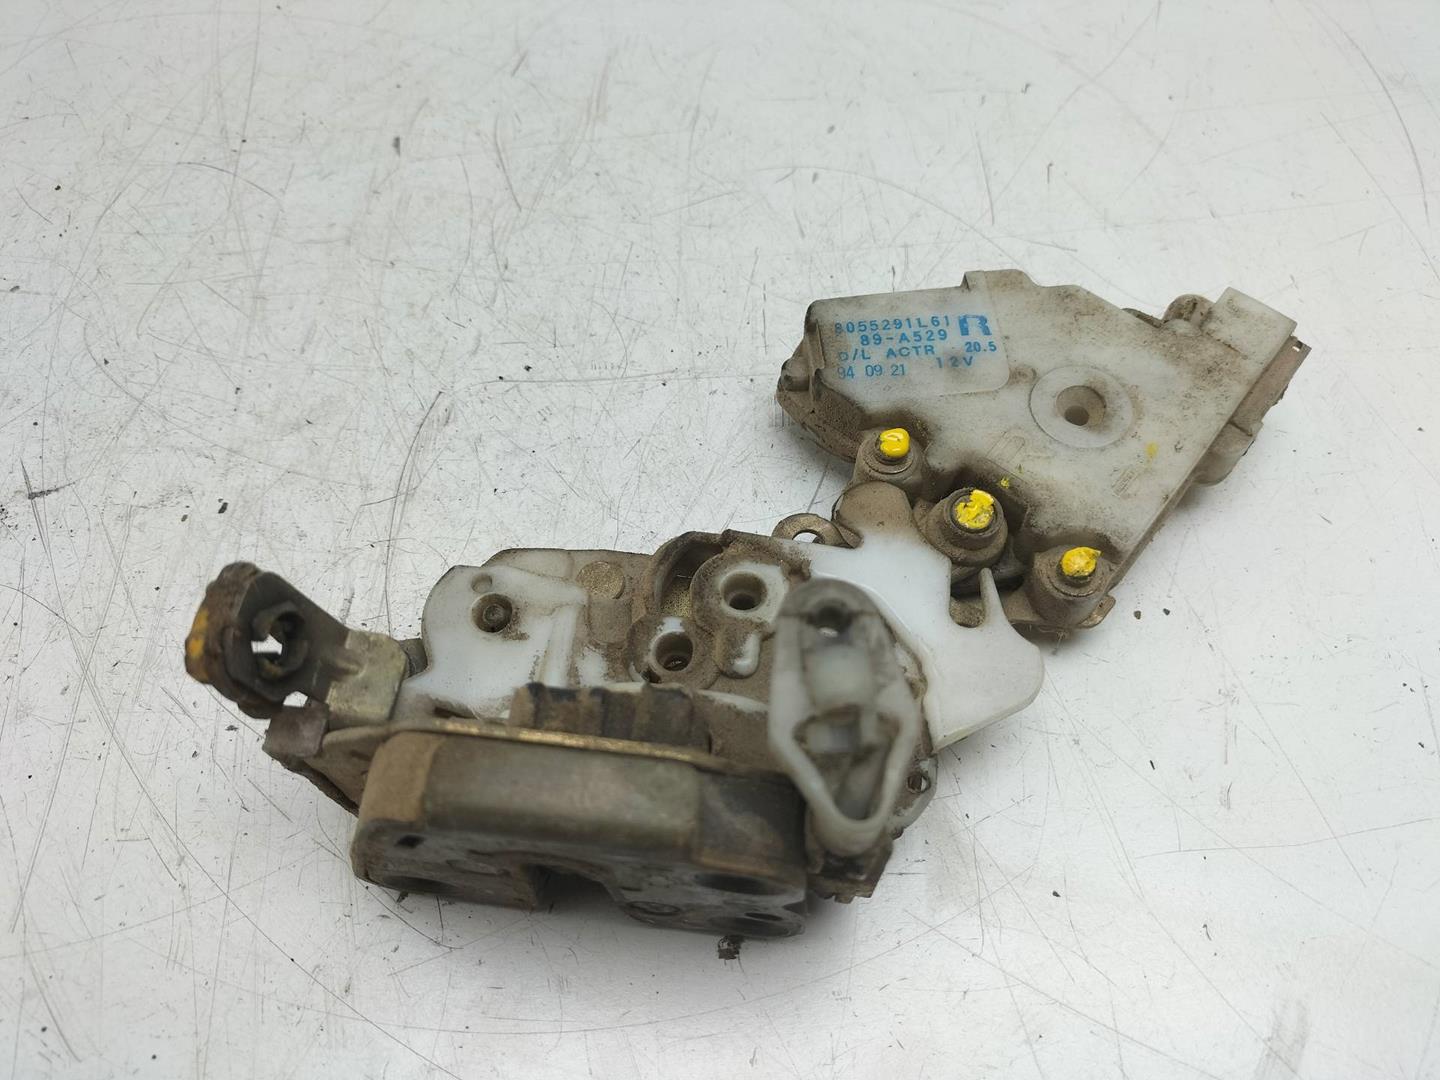 FORD Terrano 2 generation (1993-2006) Front Right Door Lock 8055291L61, 89-A529, 2PINES 19277275